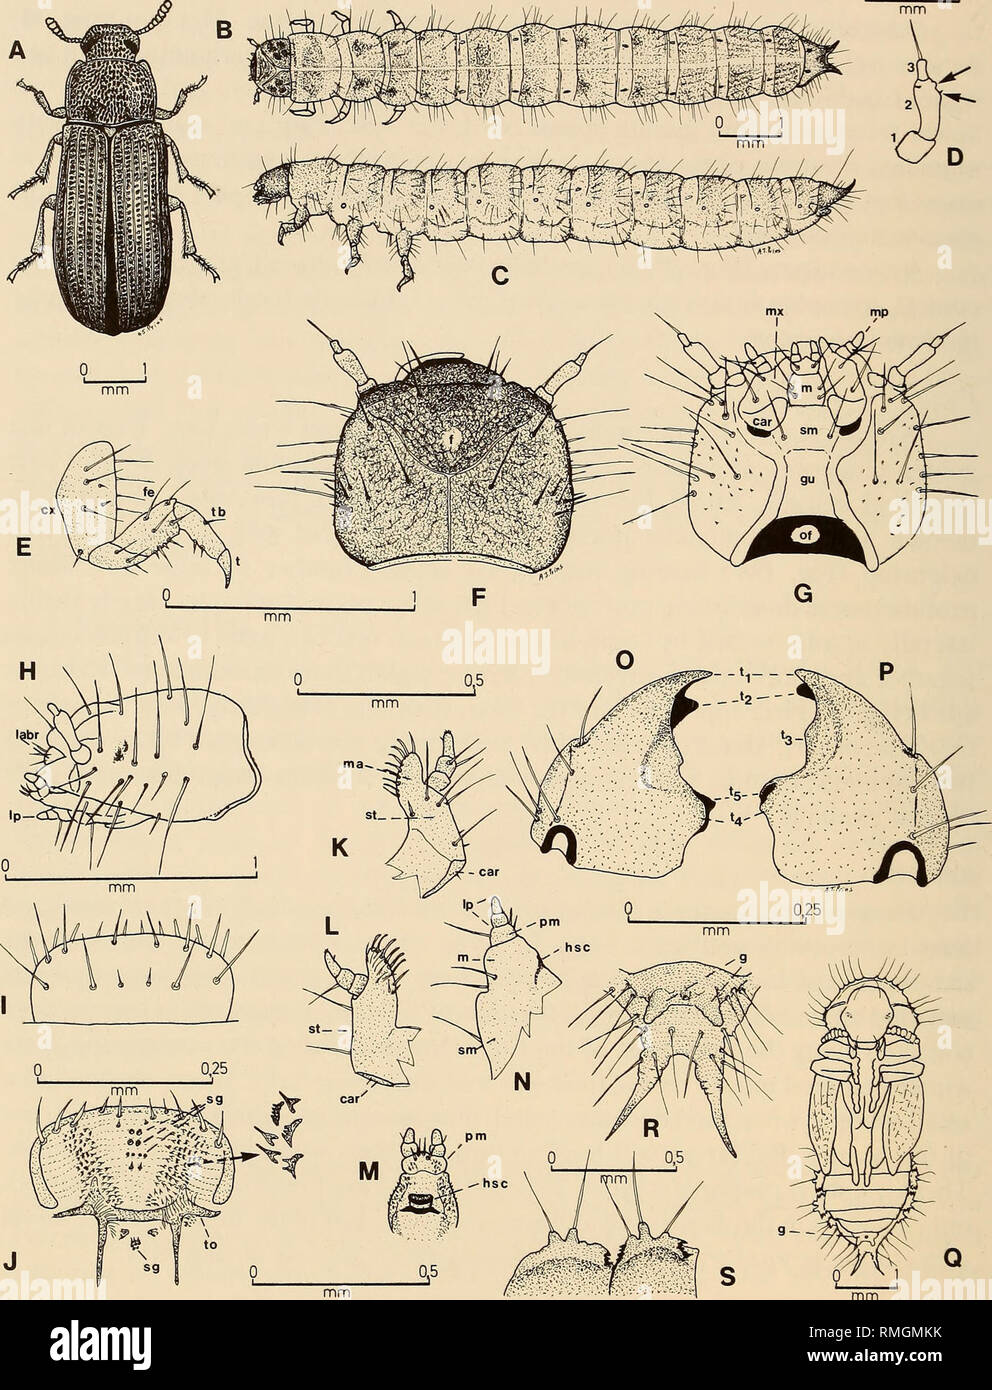 . Annals of the South African Museum = Annale van die Suid-Afrikaanse Museum. Natural history. 240 ANNALS OF THE SOUTH AFRICAN MUSEUM. Fig. 10. Tenehrionidae. TriboUum destructor. A. Adult. B-P. Larva. B. Dorsal view. C. Left lateral view. D. Antenna. E. Right mesothoracic leg. F. Head, dorsal view. G. Head, ventral view. H. Head, left lateral view. L Labrum, dorsal view. J. Epipharynx. K. Left maxilla, ventral view. L. Left maxilla, dorsal view. M. Hypopharynx. N. Labium, left lateral view. O. Left mandible, dorsal view. P. Right mandible, dorsal view. Q-S. Pupa. Q. Ventral view. R. Abdominal Stock Photo